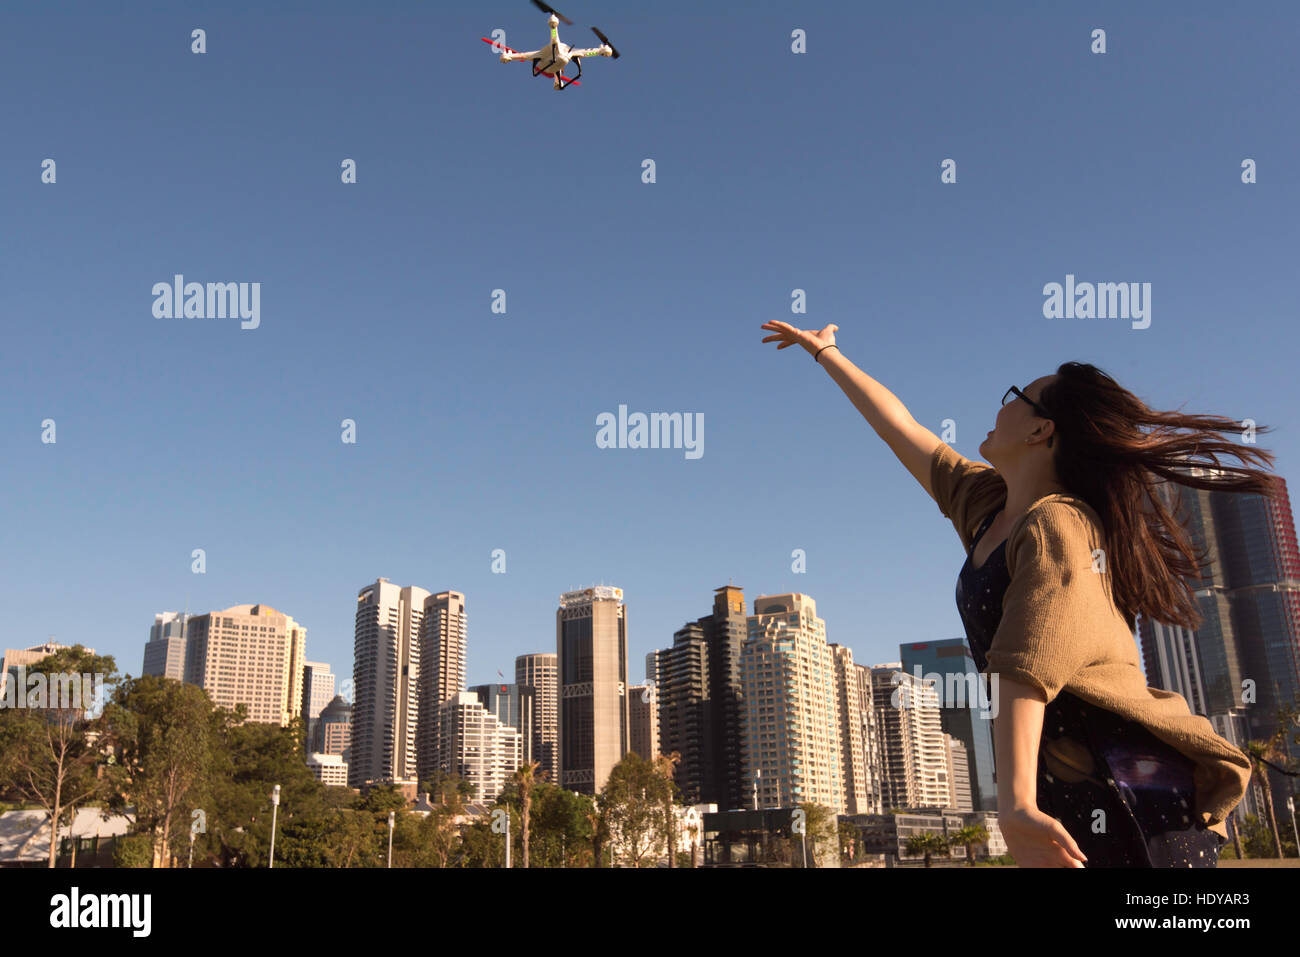 A young woman playing and launching with a small drone in a park near city buildings Stock Photo